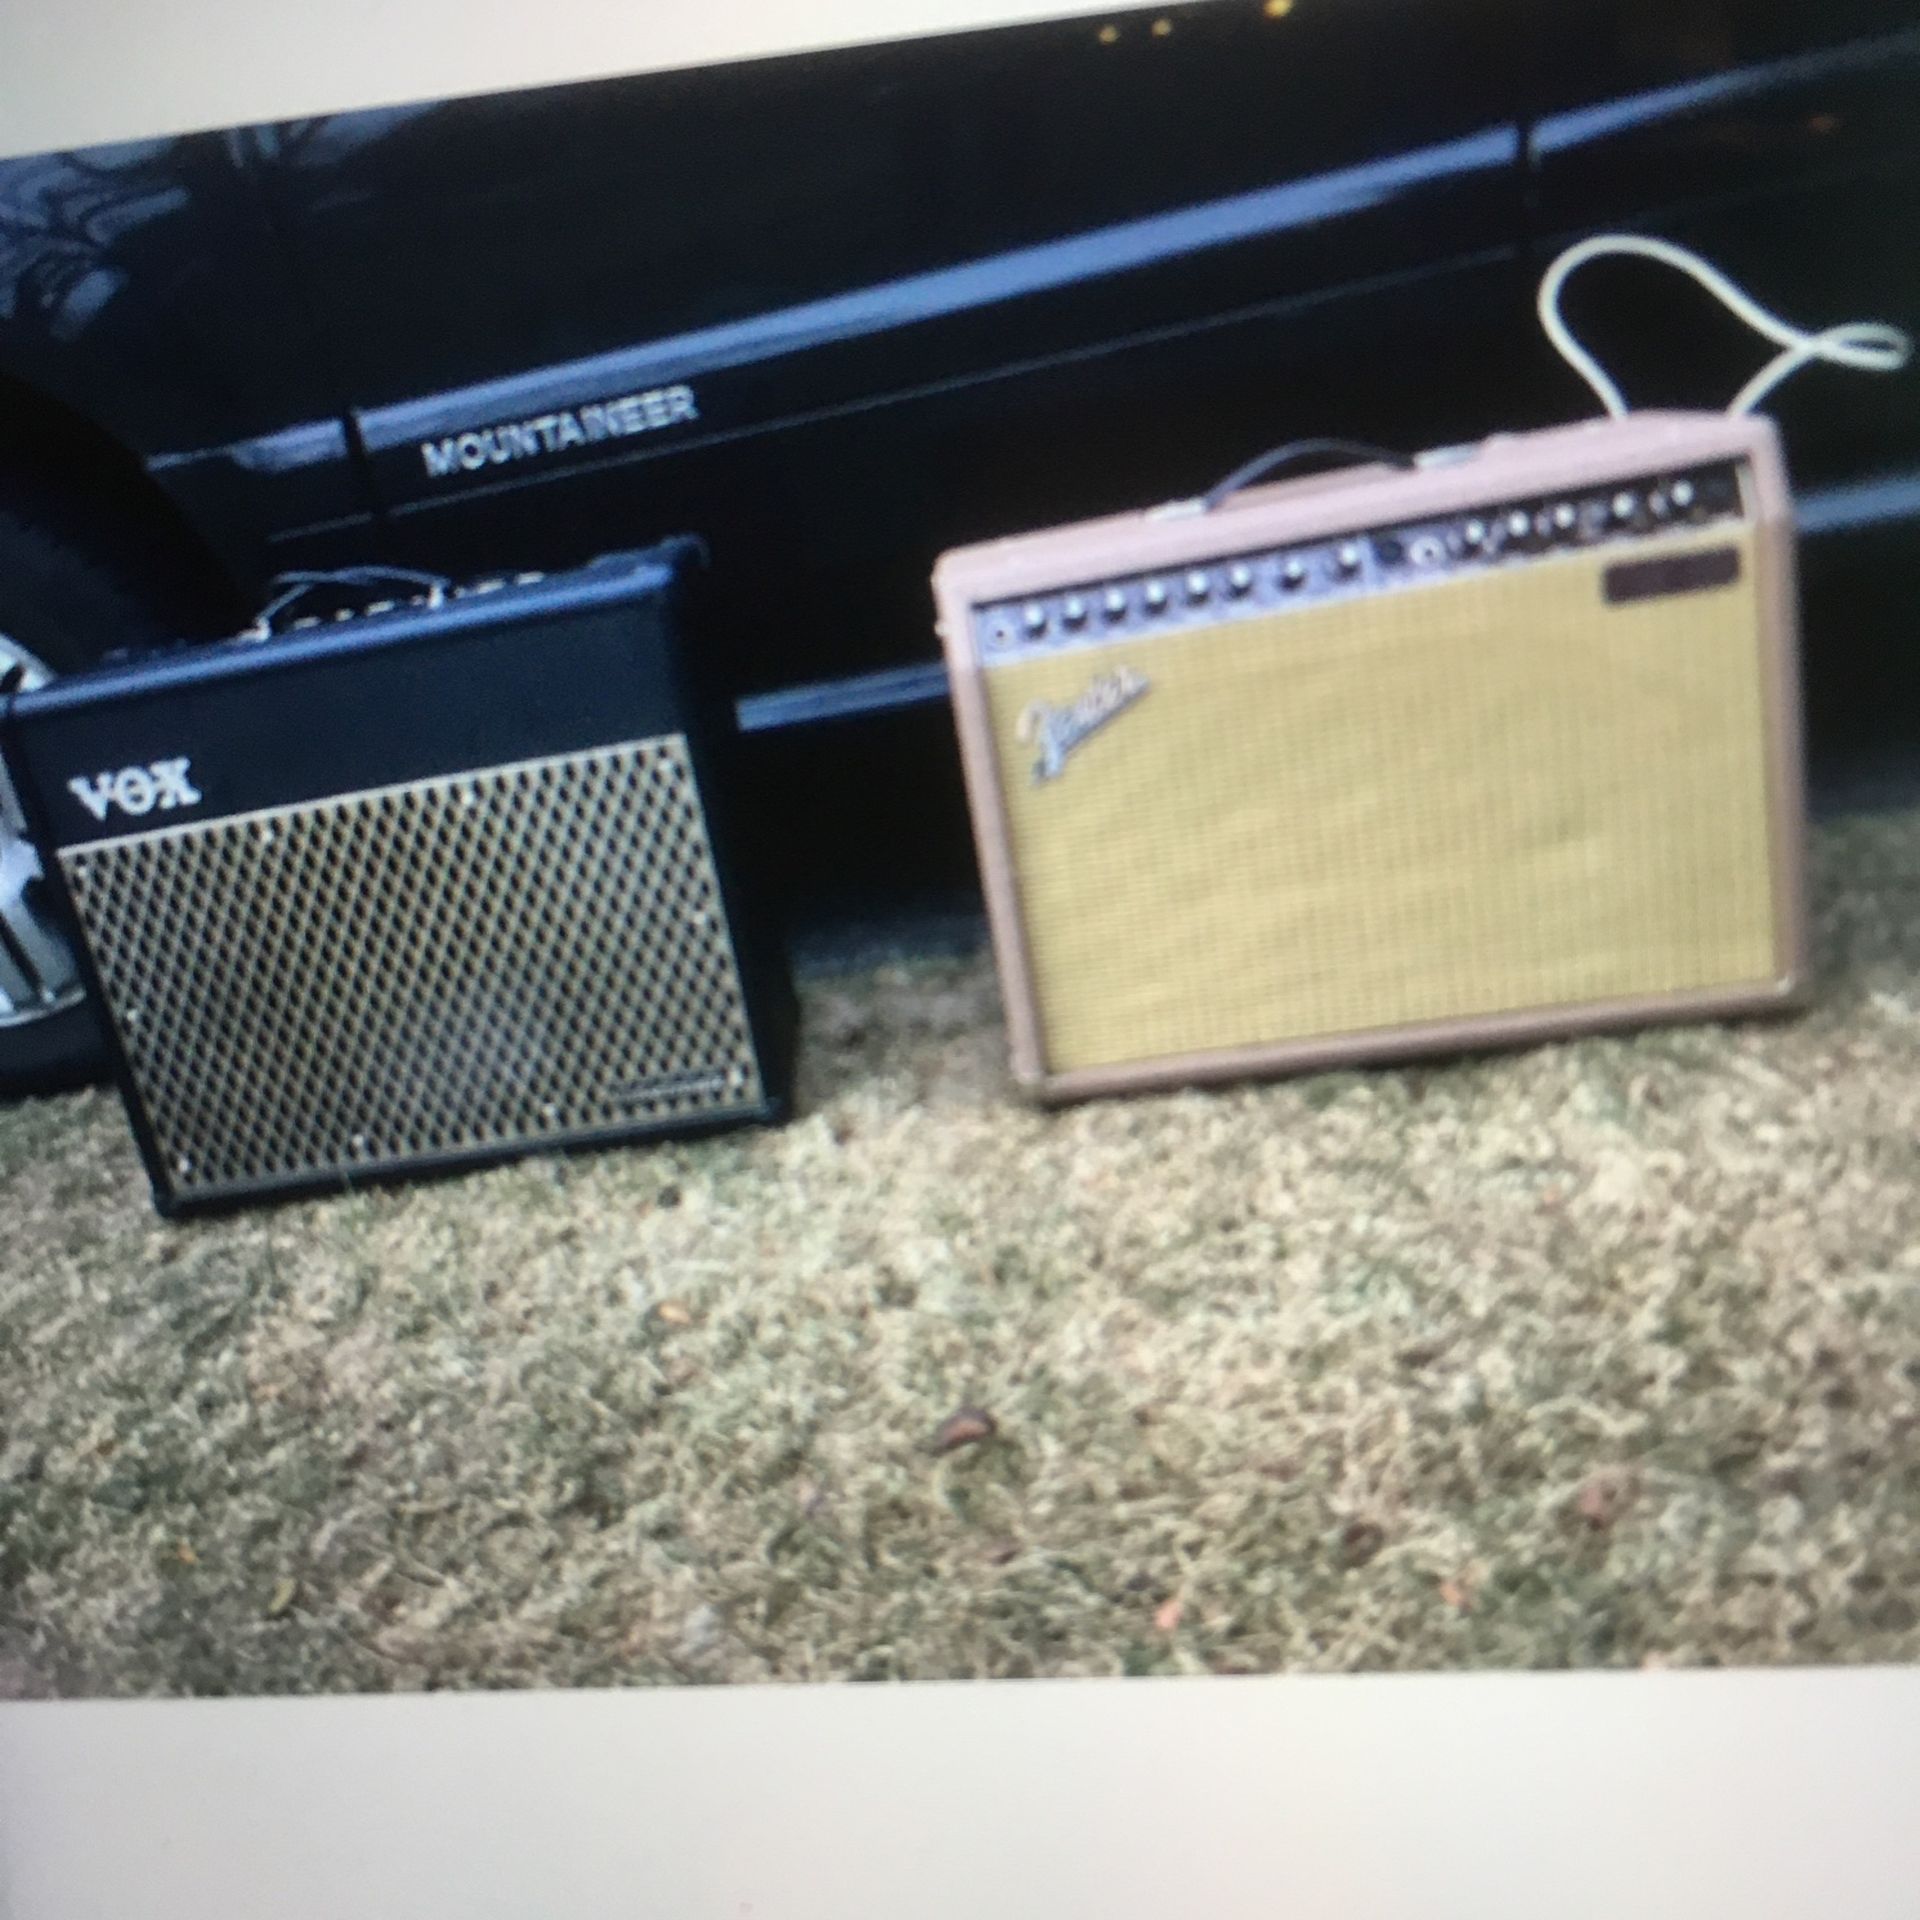 VOX Electric Guitar Power Amp and Fender Acoustisonic Acoustic Guitar Amp